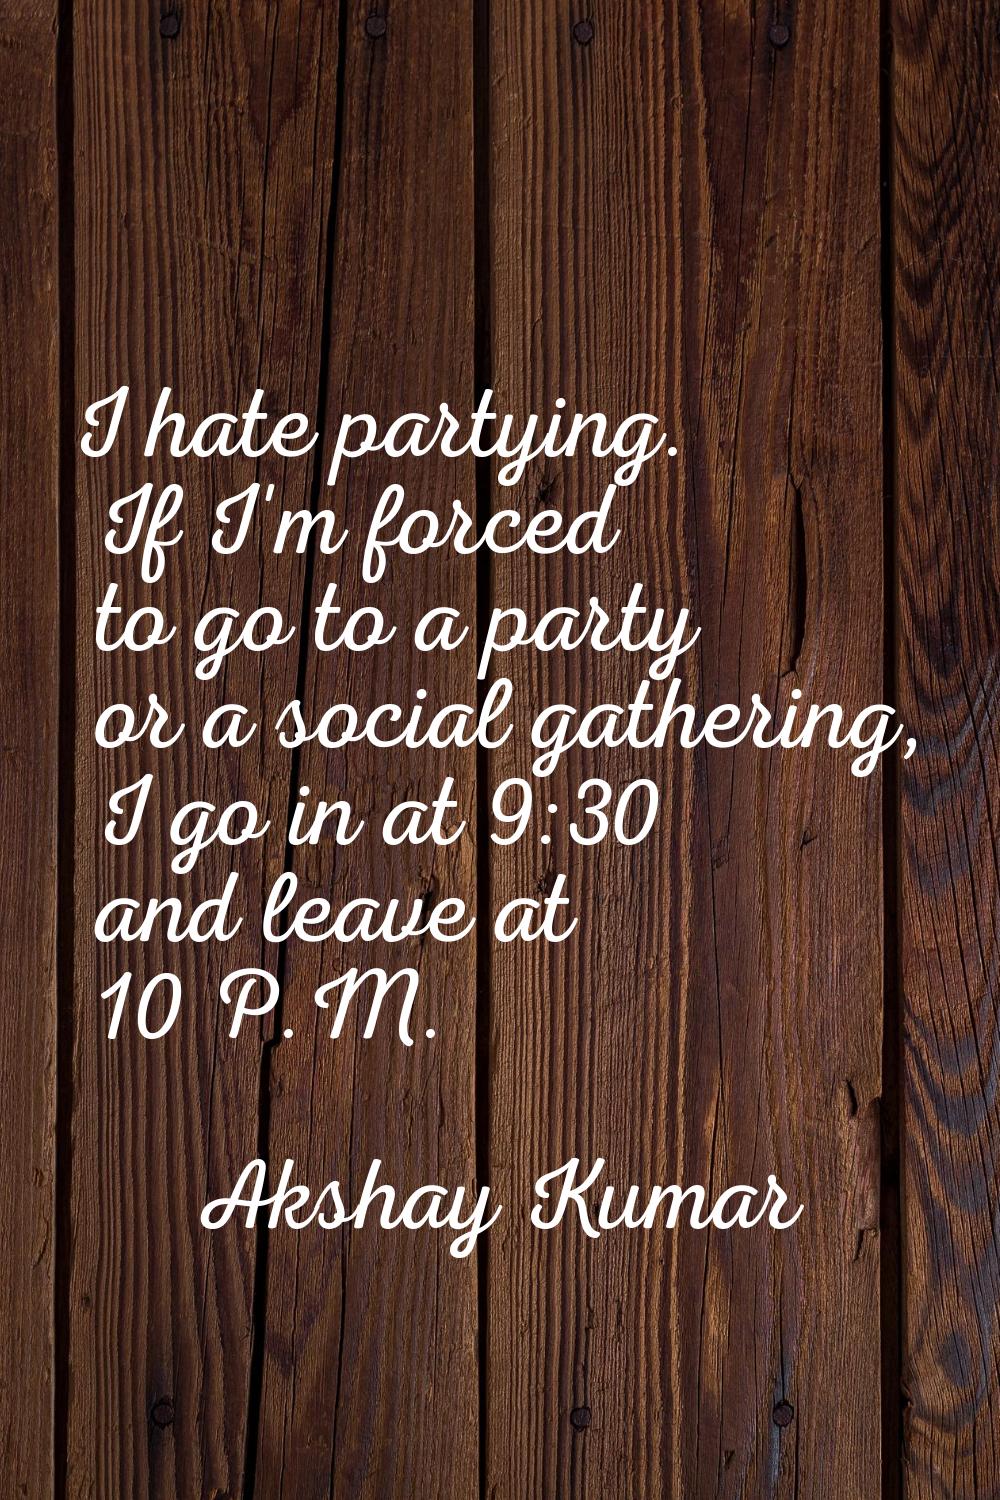 I hate partying. If I'm forced to go to a party or a social gathering, I go in at 9:30 and leave at